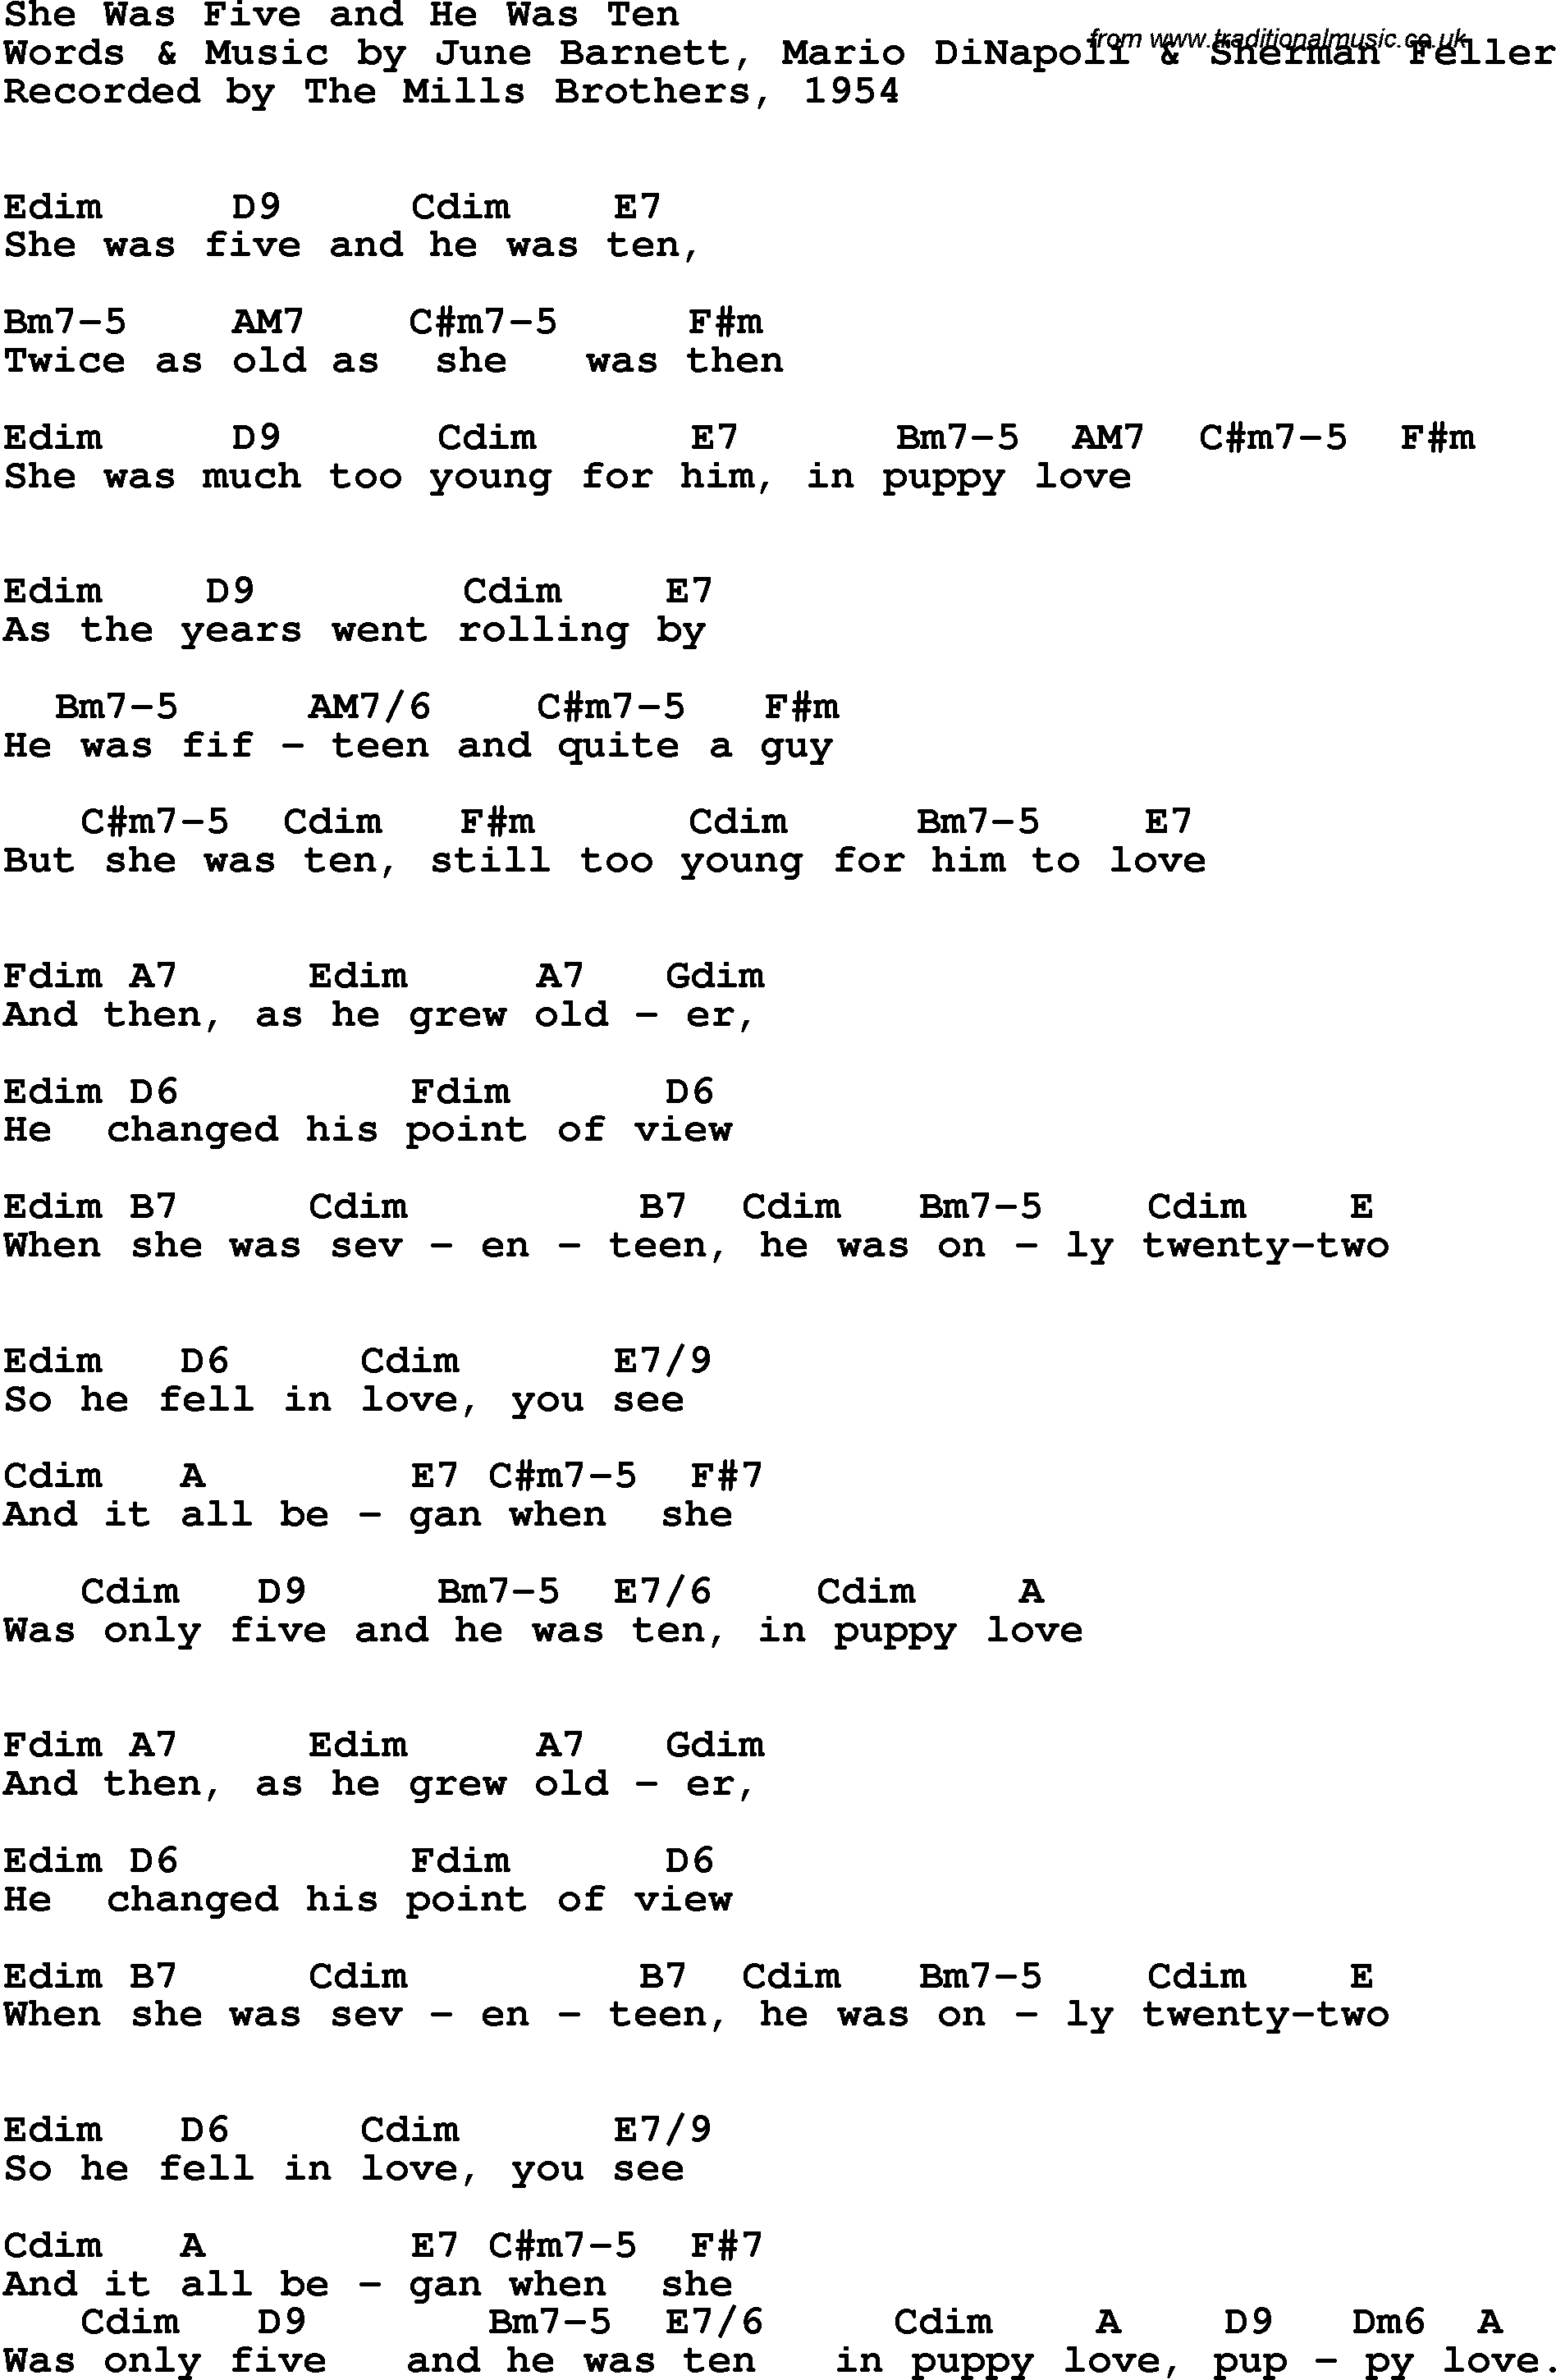 Song Lyrics with guitar chords for She Was Five And He Was Ten - The Mills Brothers, 1954